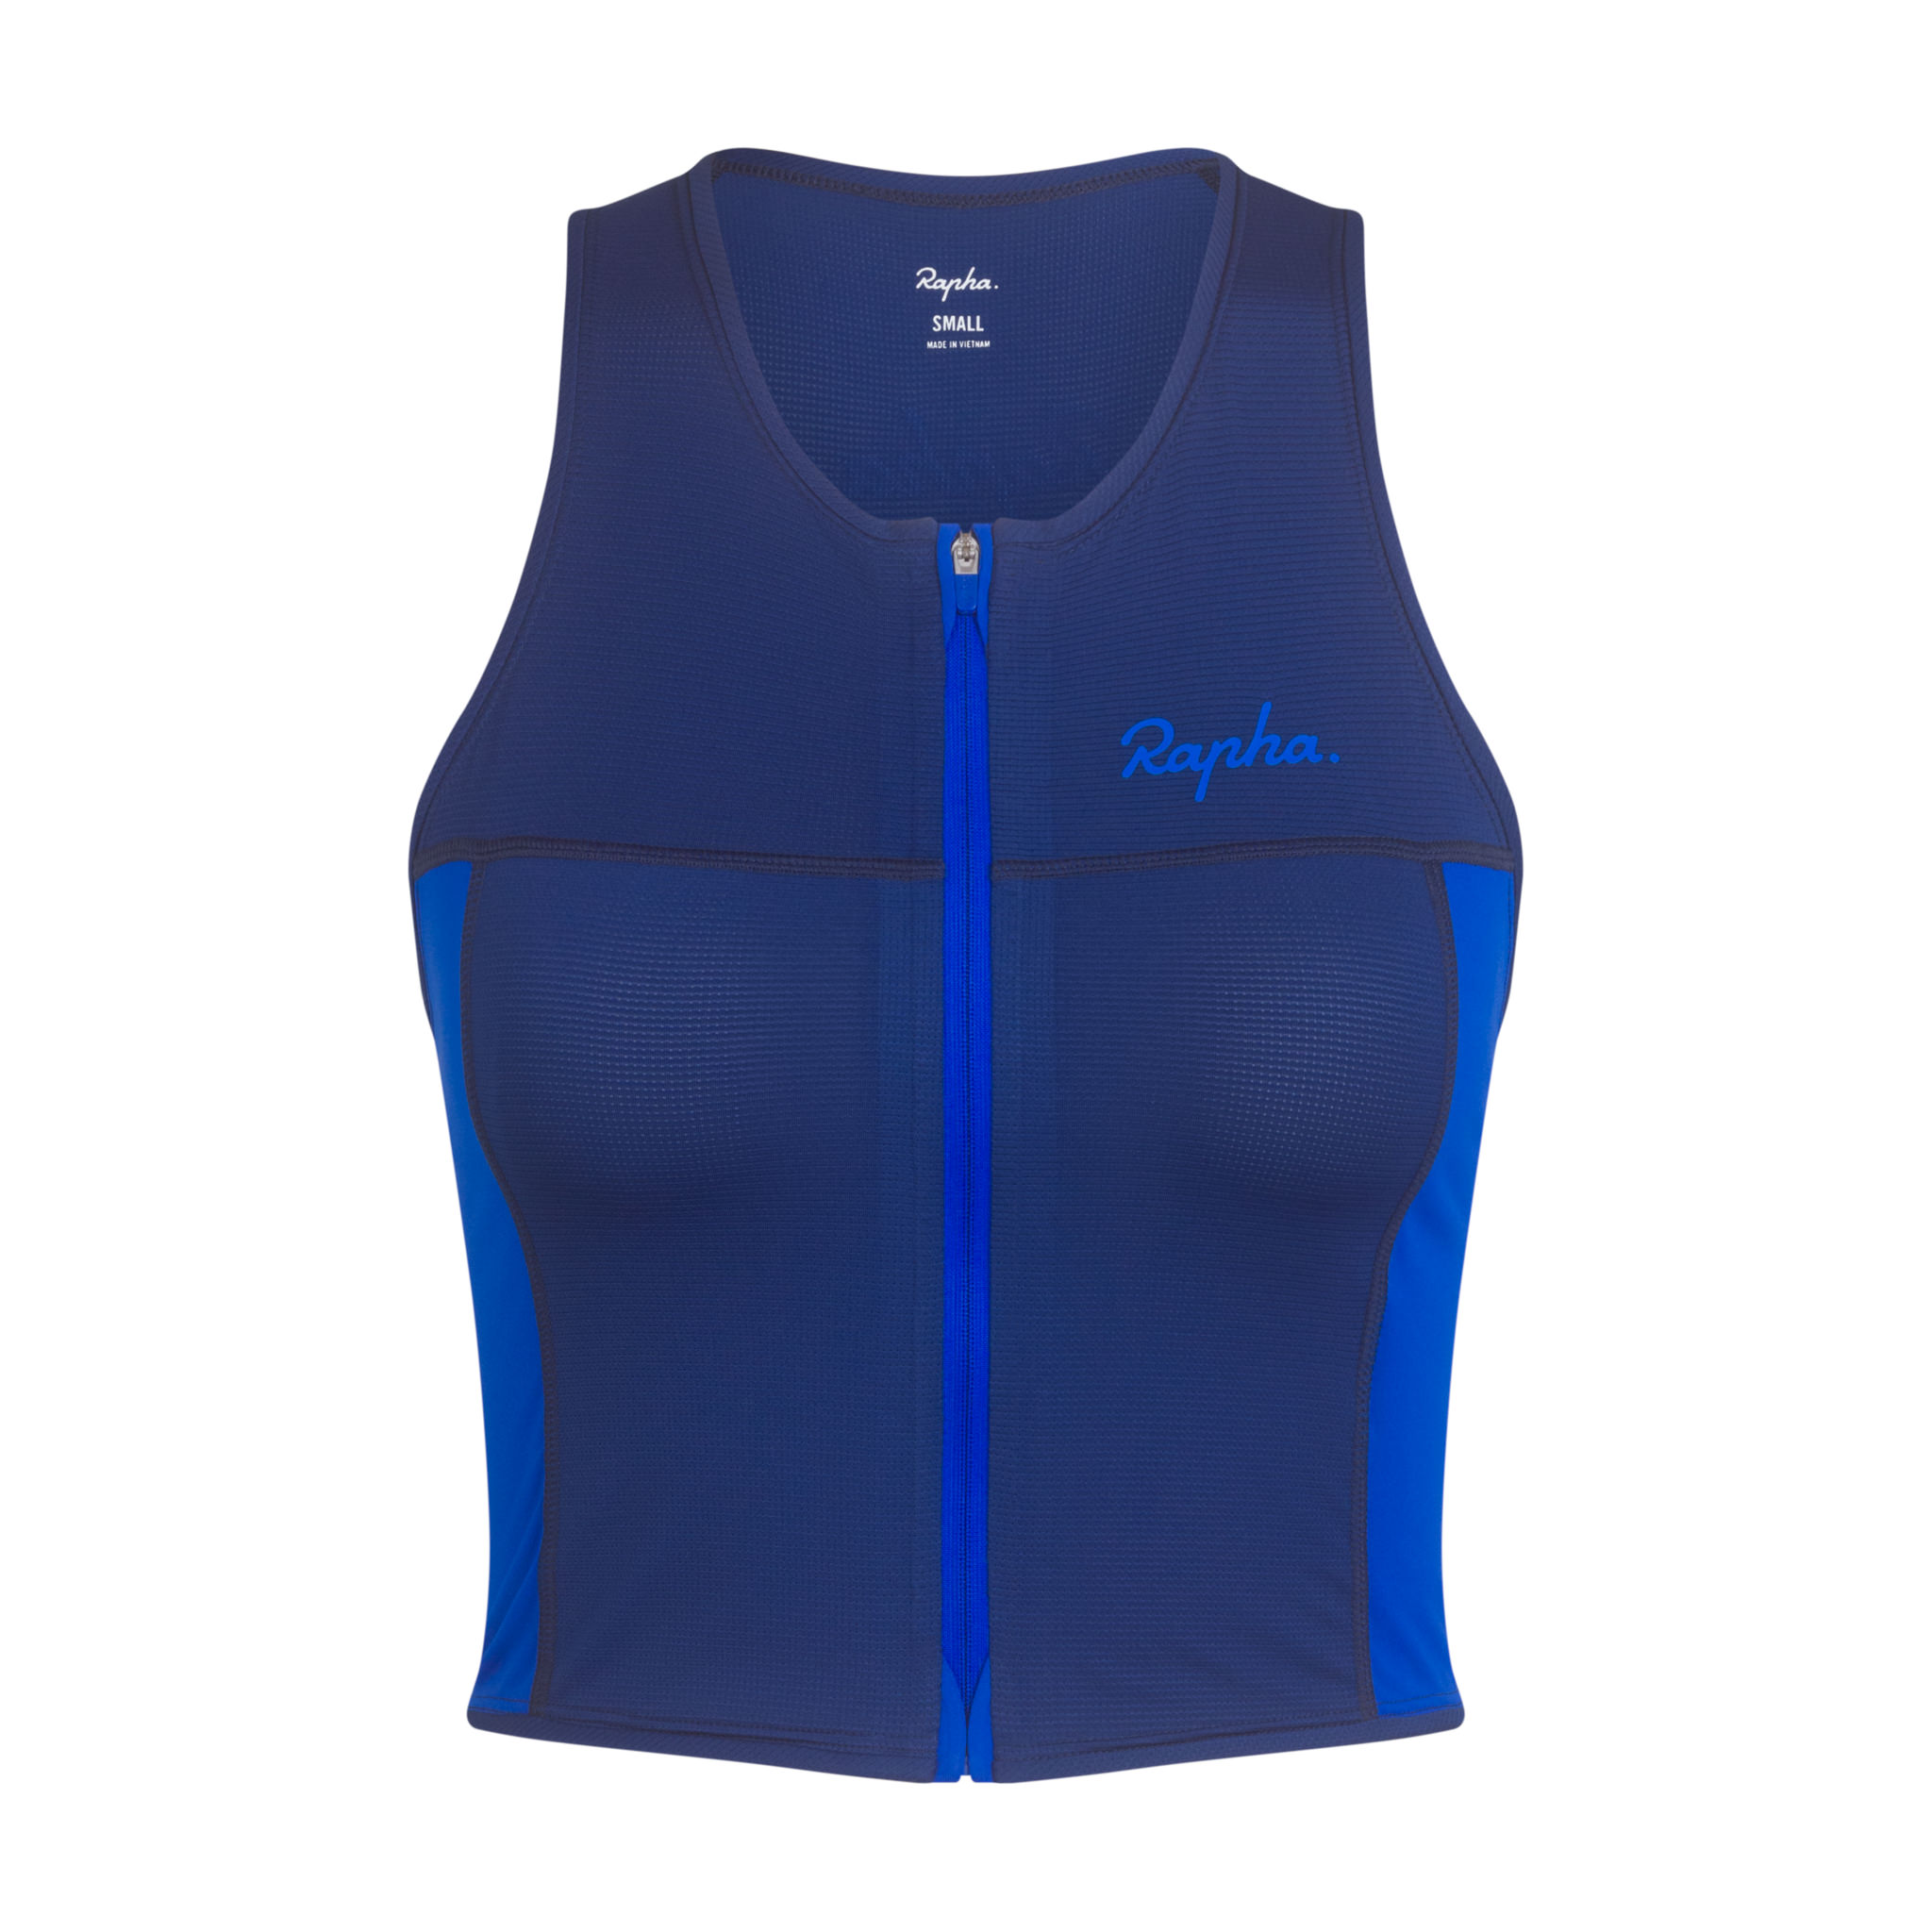 Hell Yes Gym Vest Gym Clothing Women's Gym Clothes Gym Vests